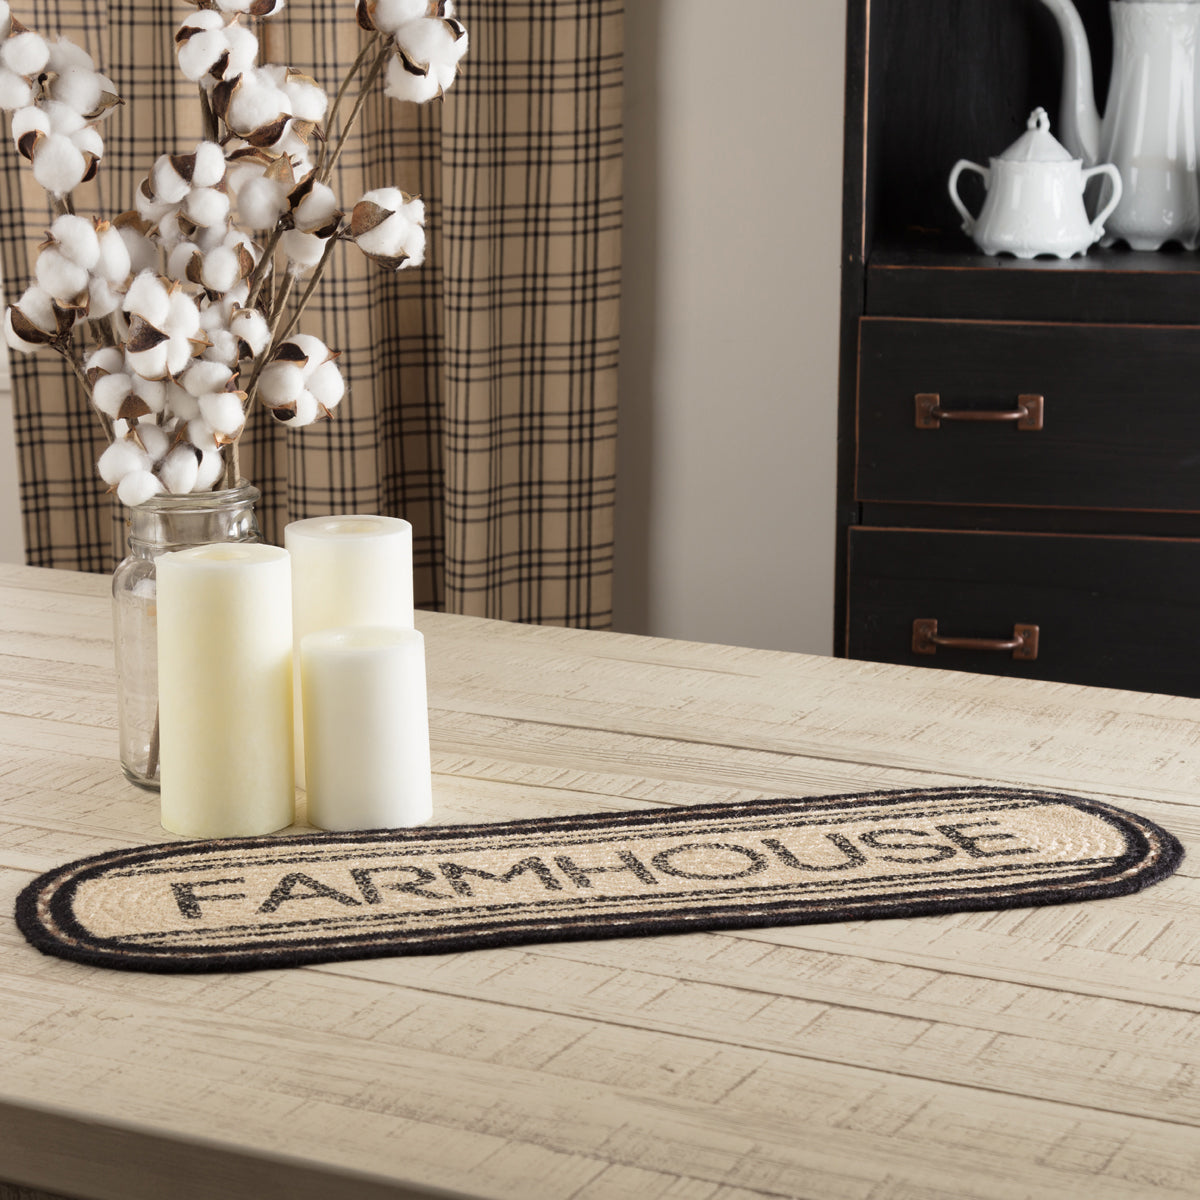 45735-Sawyer-Mill-Charcoal-Creme-Farmhouse-Jute-Oval-Runner-8x24-image-3